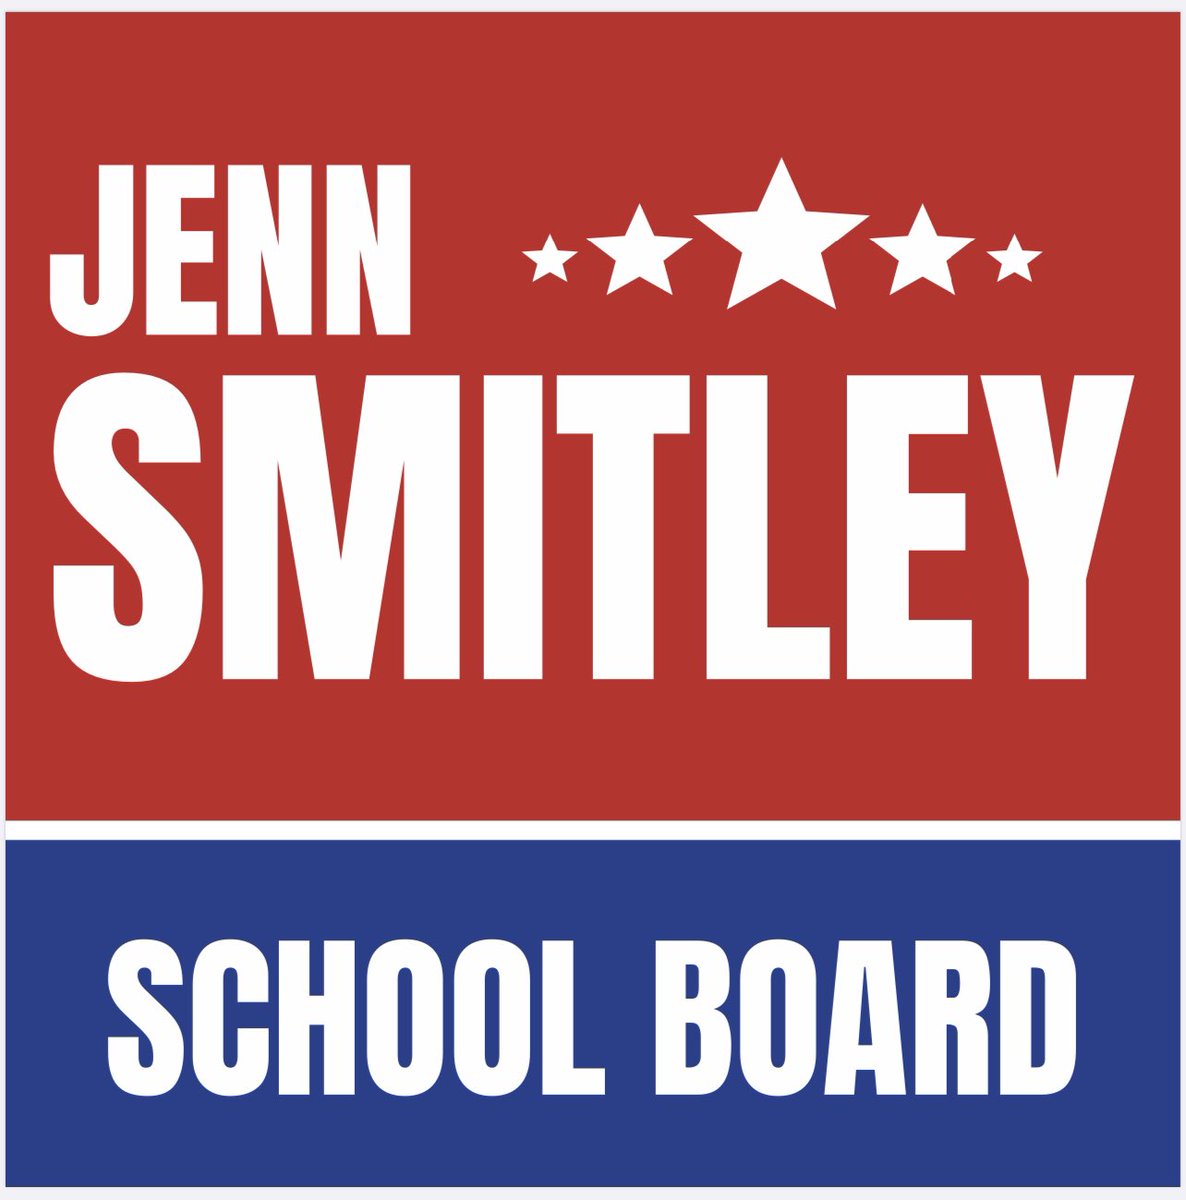 This candidate supports:
•public education
•administrators, teachers, staff
•high quality education for all students
•safe and supportive learning environments 
•working with families
•building community relationships 
#educator #parent #communityvolunteer #schoolboard